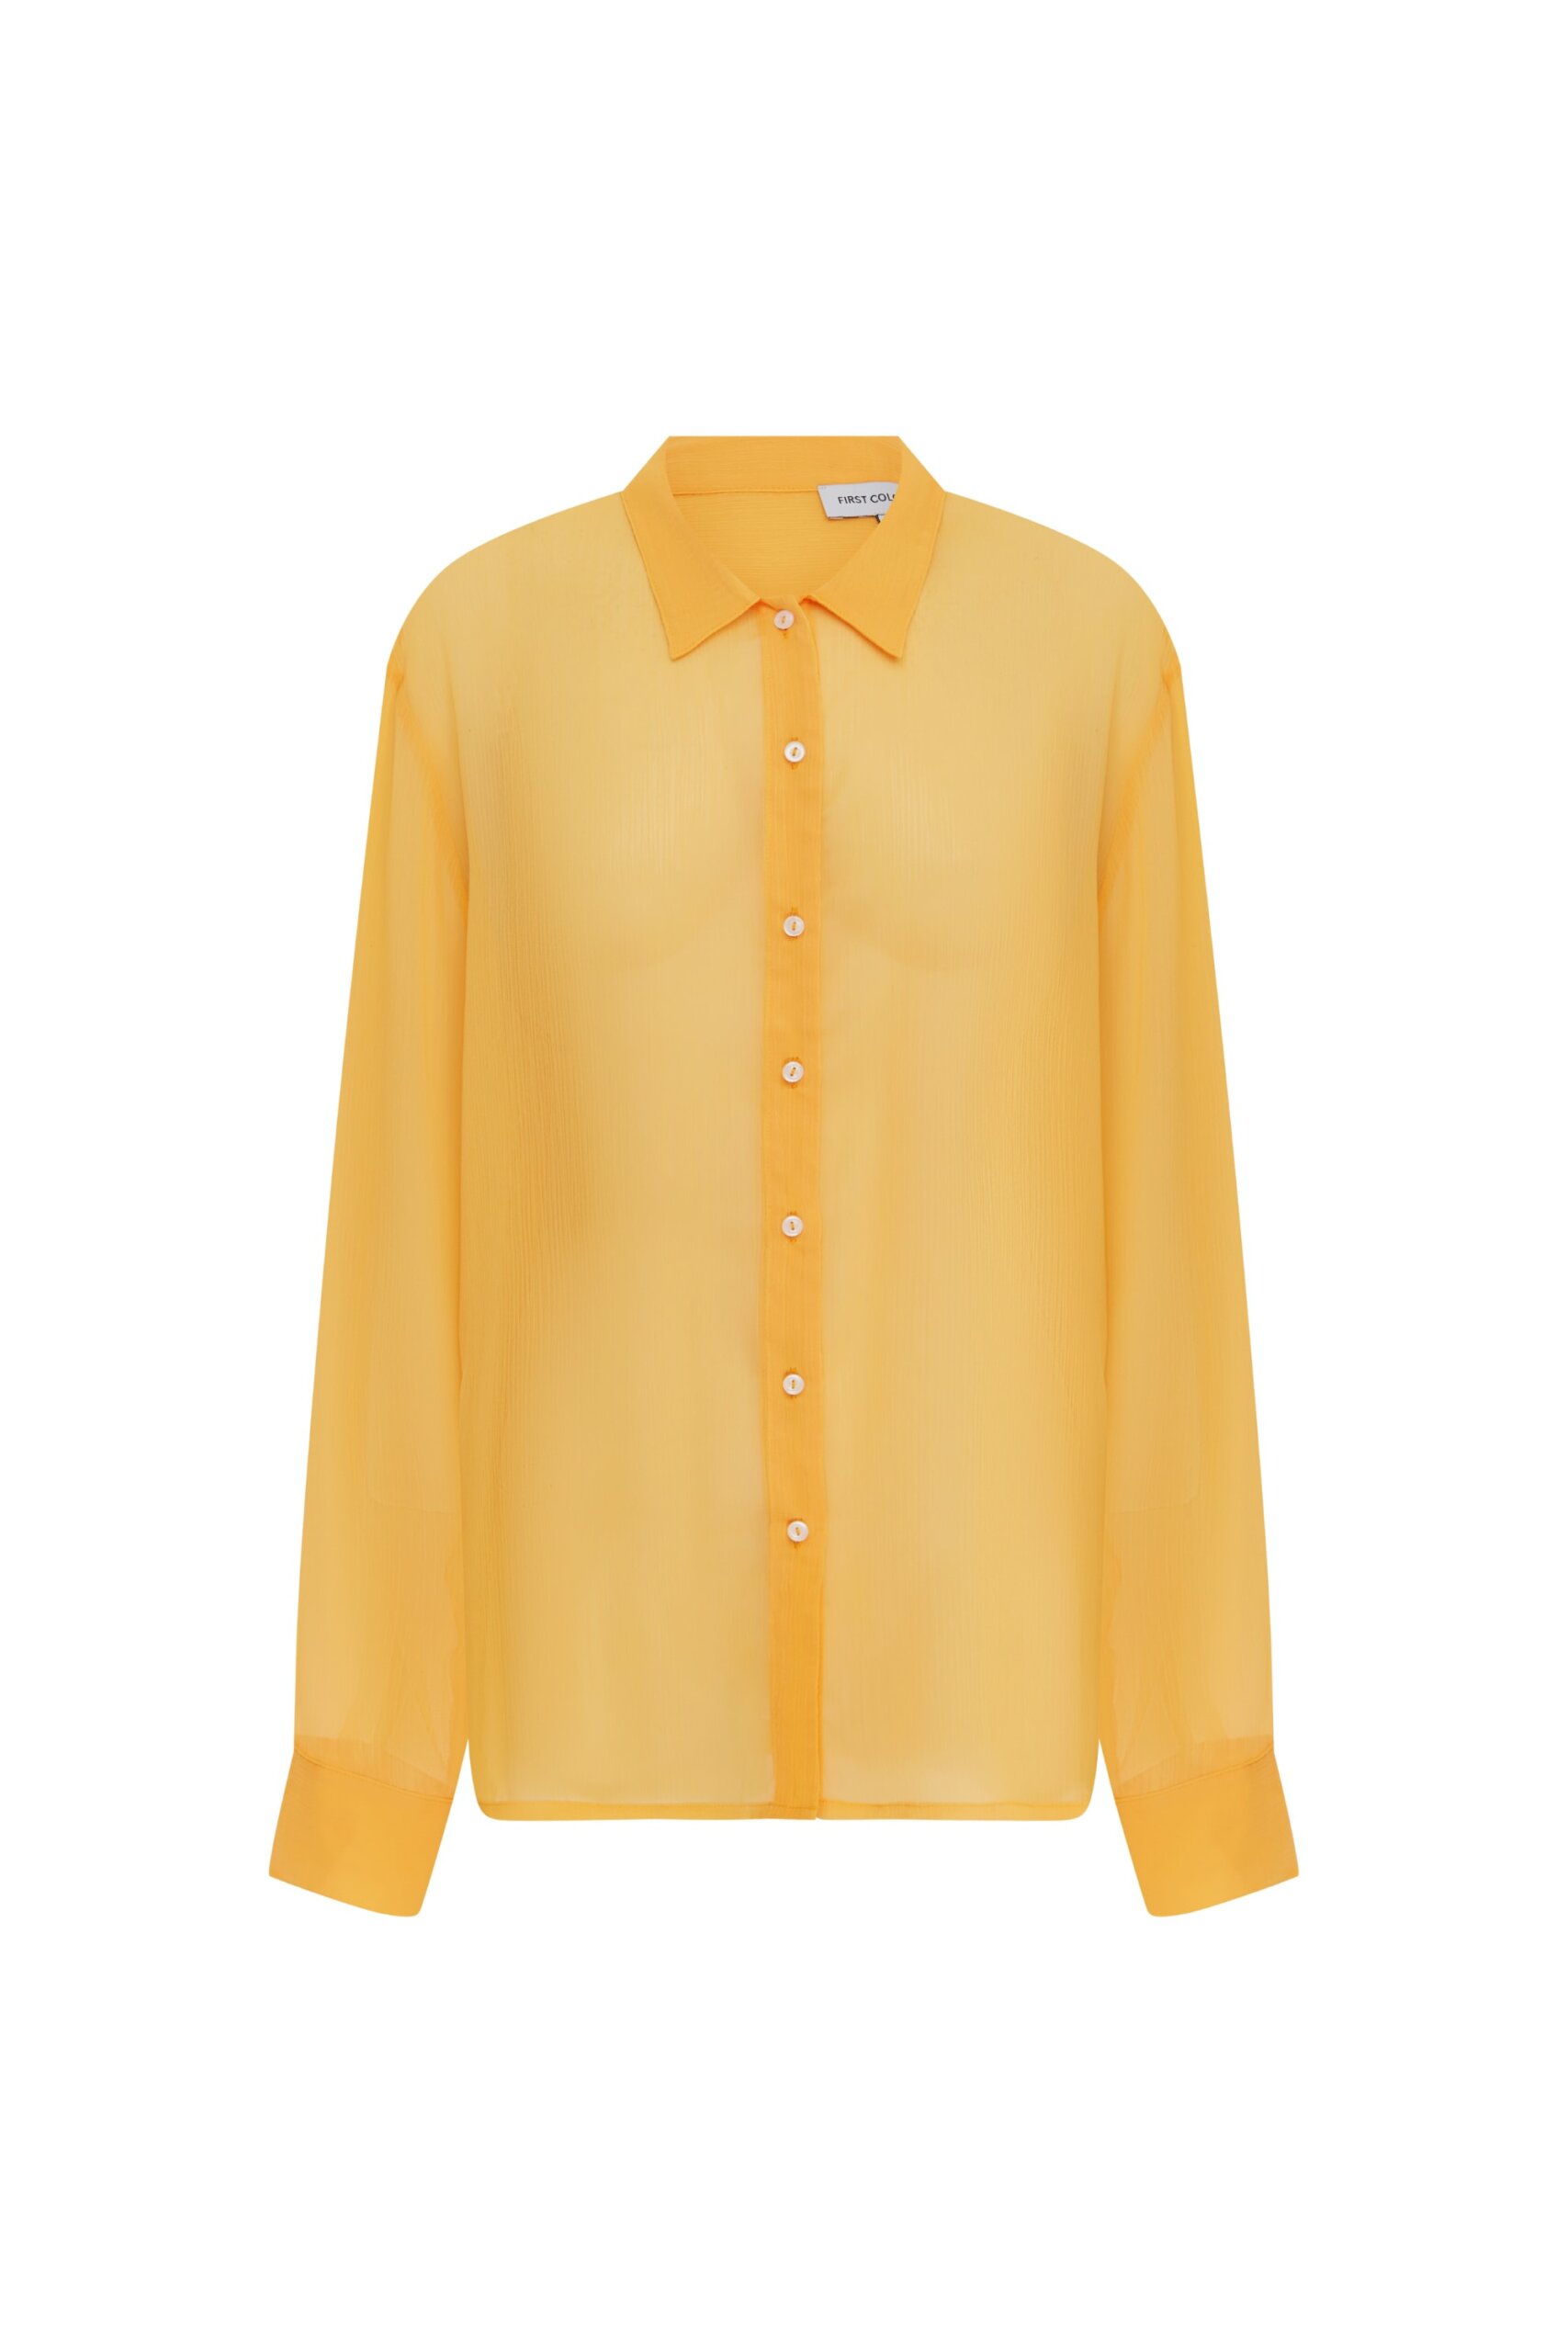 Women's Yellow / Orange Daffodil Shirt Tangerine Extra Small FIRST COLOURS